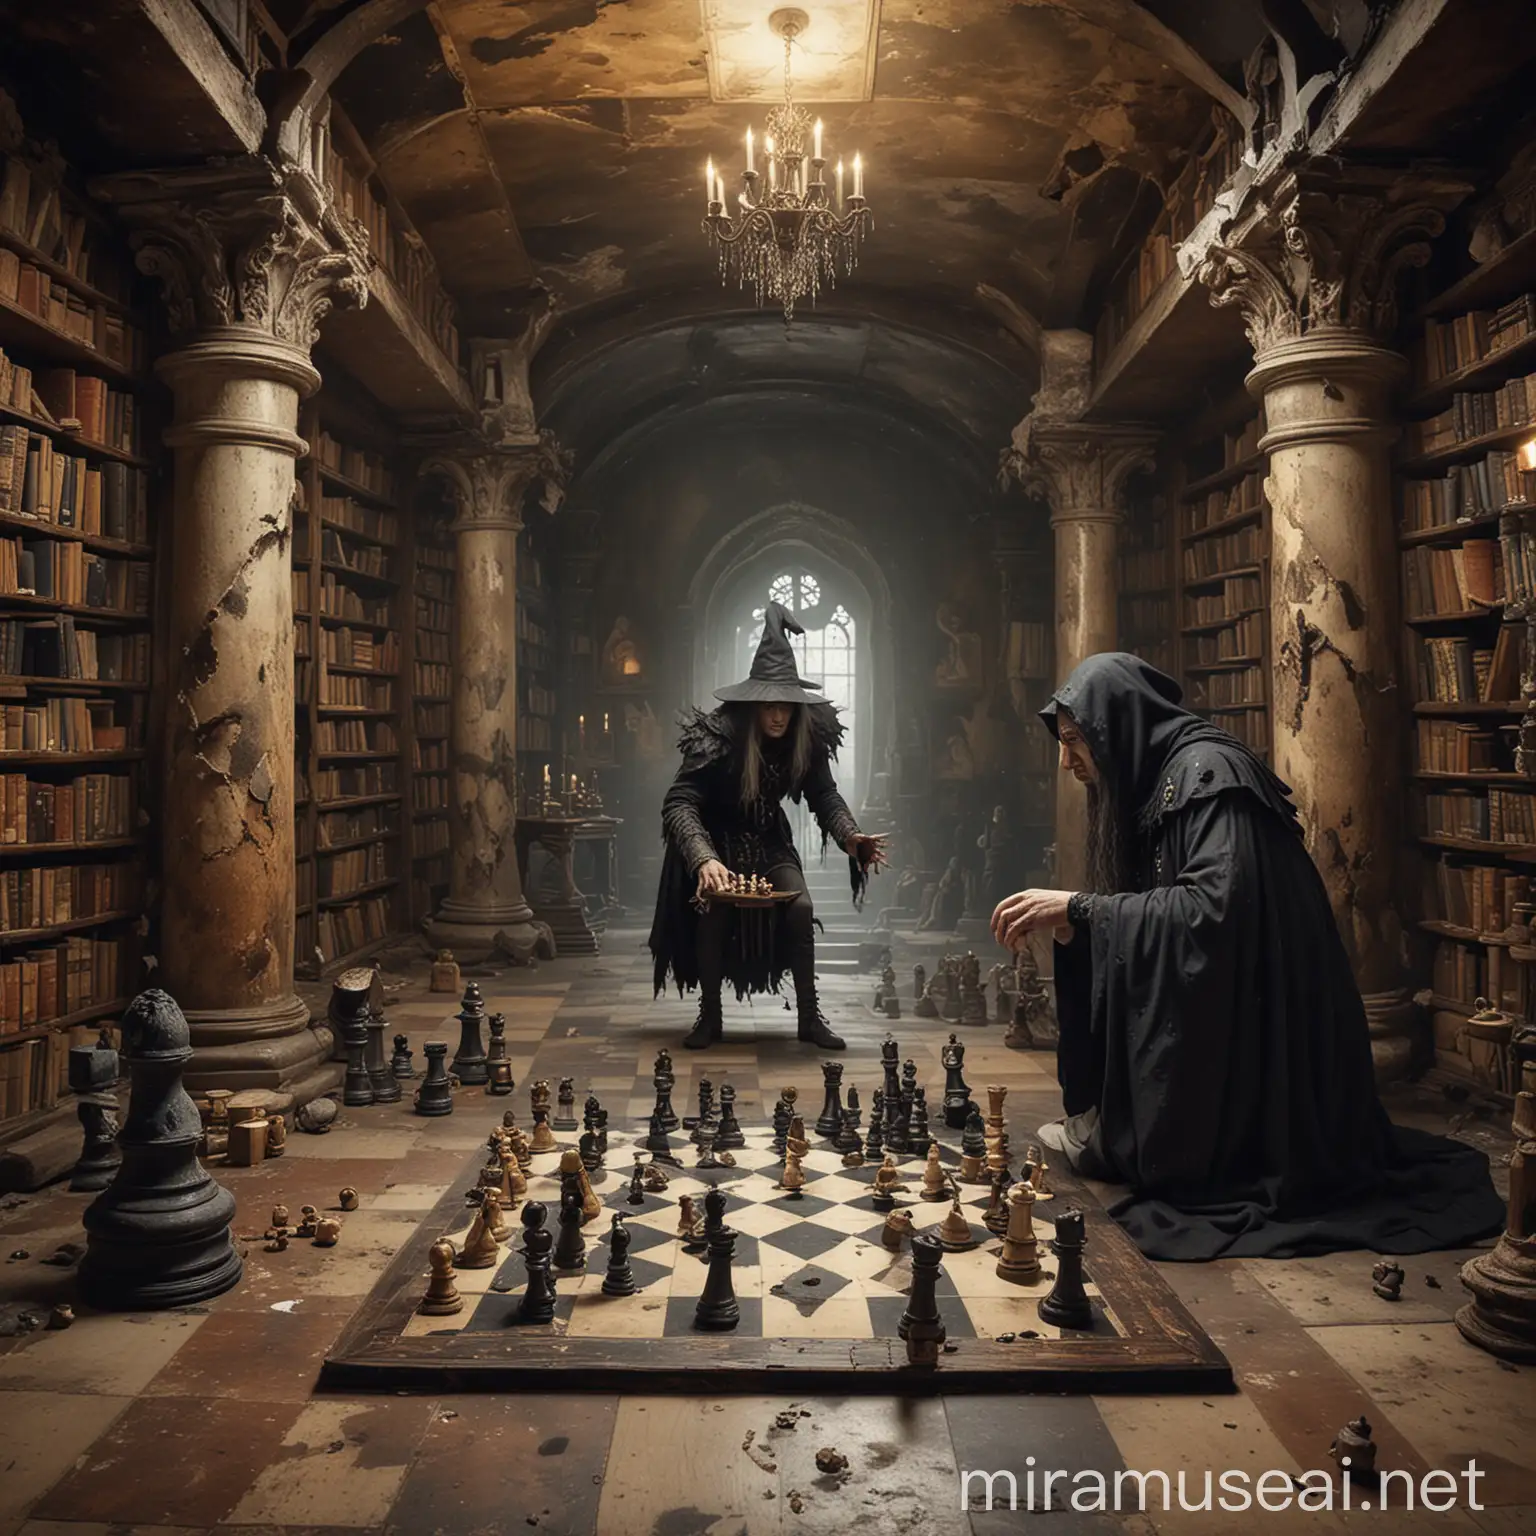 Intense Chess Match with a Menacing Witch in a Crumbling Library